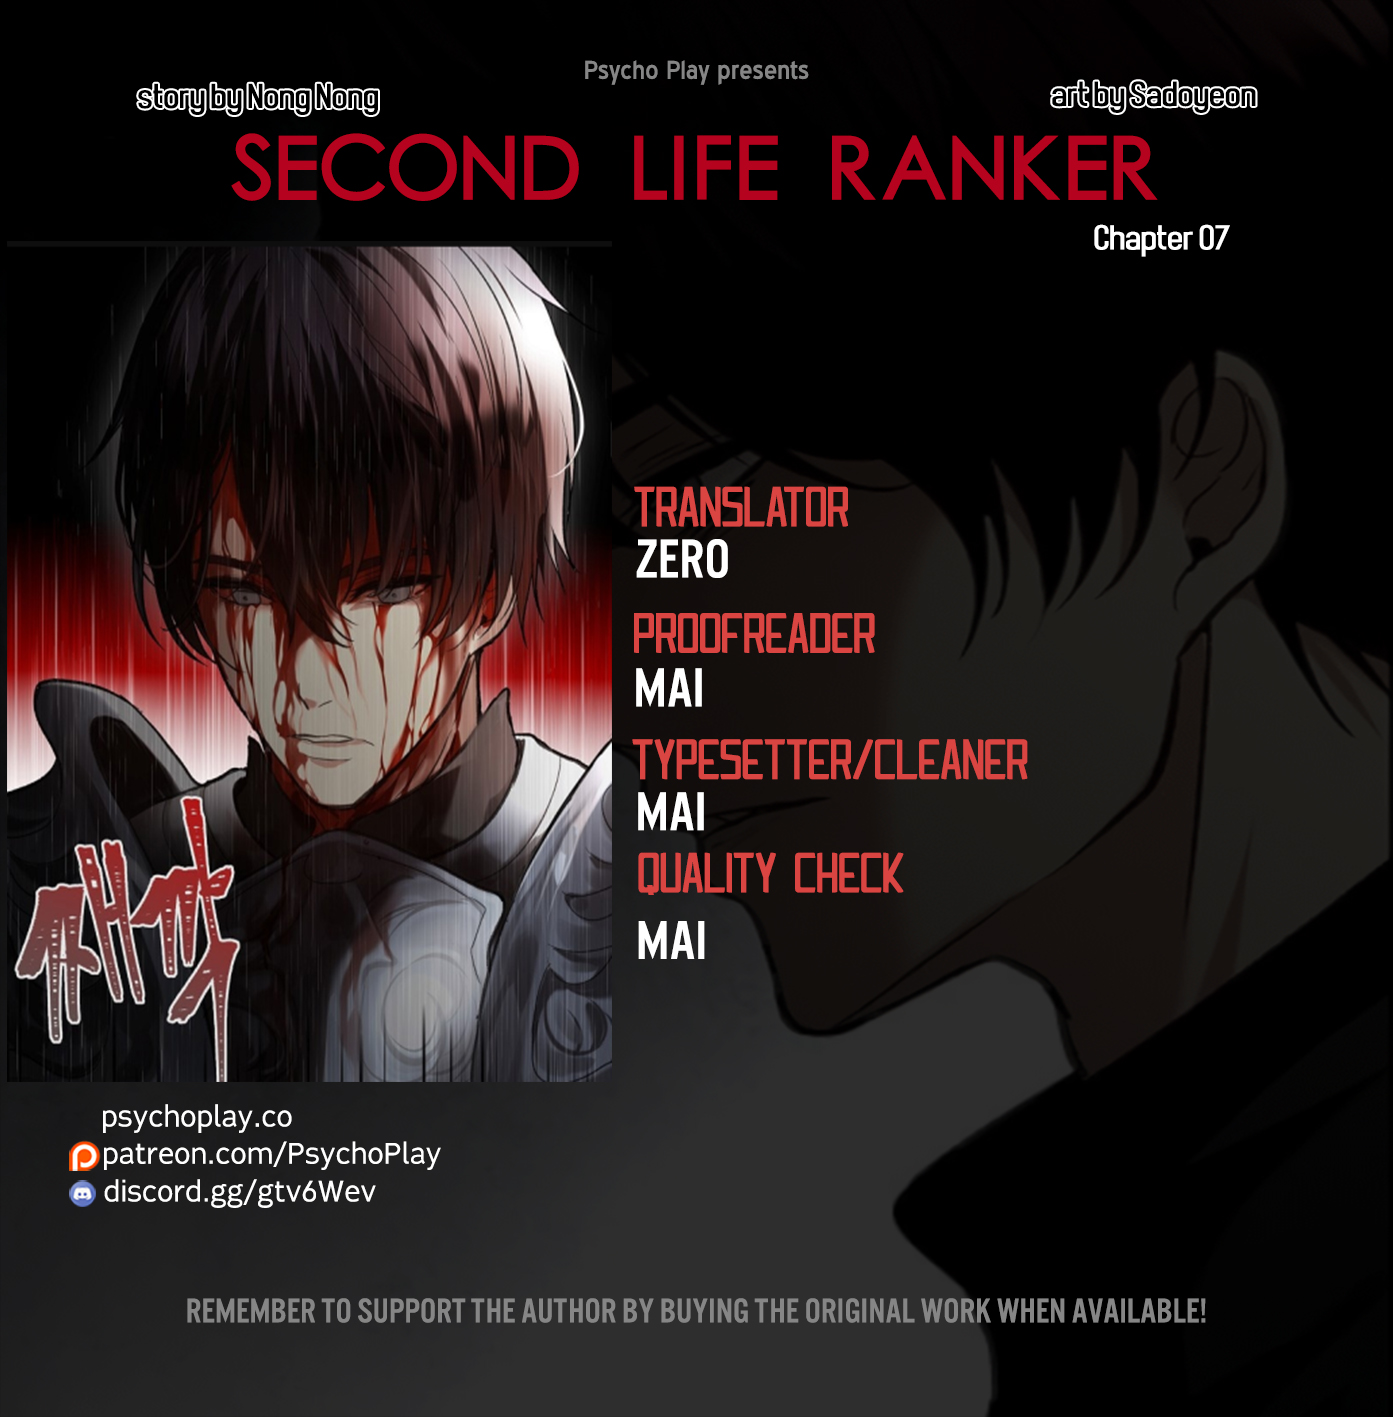 second life ranker, ranker who lives twice, ranker who lives a second time